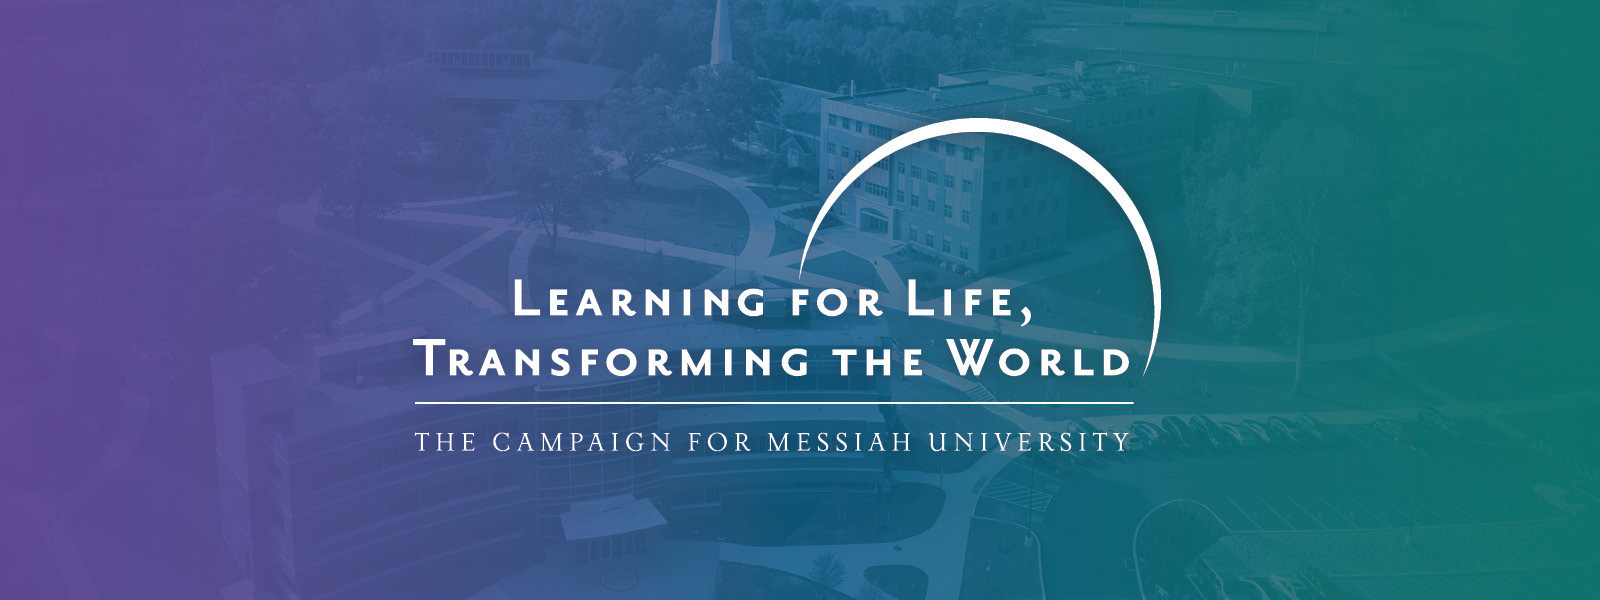 The Campaign for Messiah University header